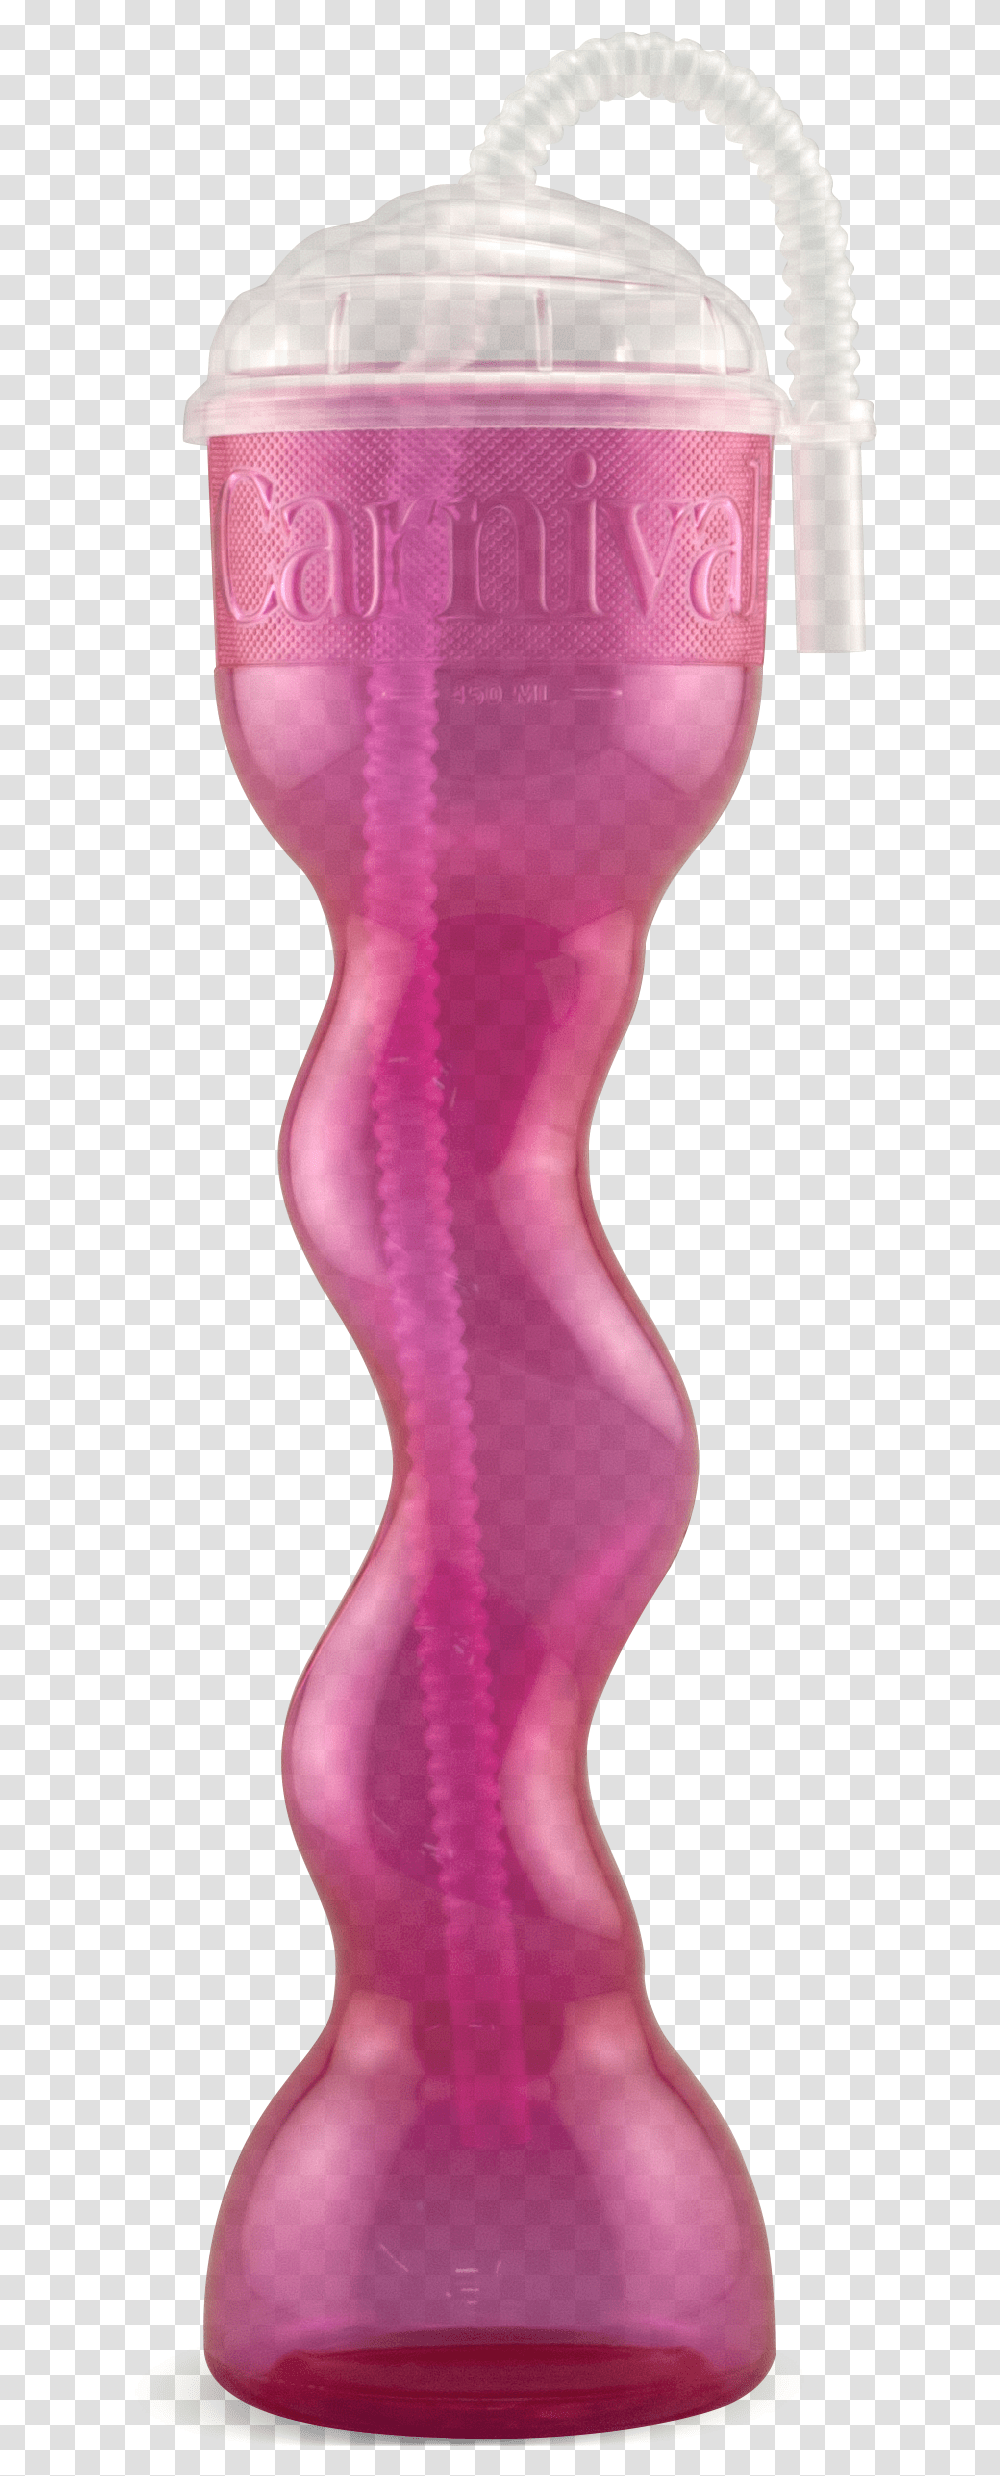 Blow Molded Twisted Yard With Snap On Twist Lid Water Bottle, Spandex, Veins, Purple, Torso Transparent Png